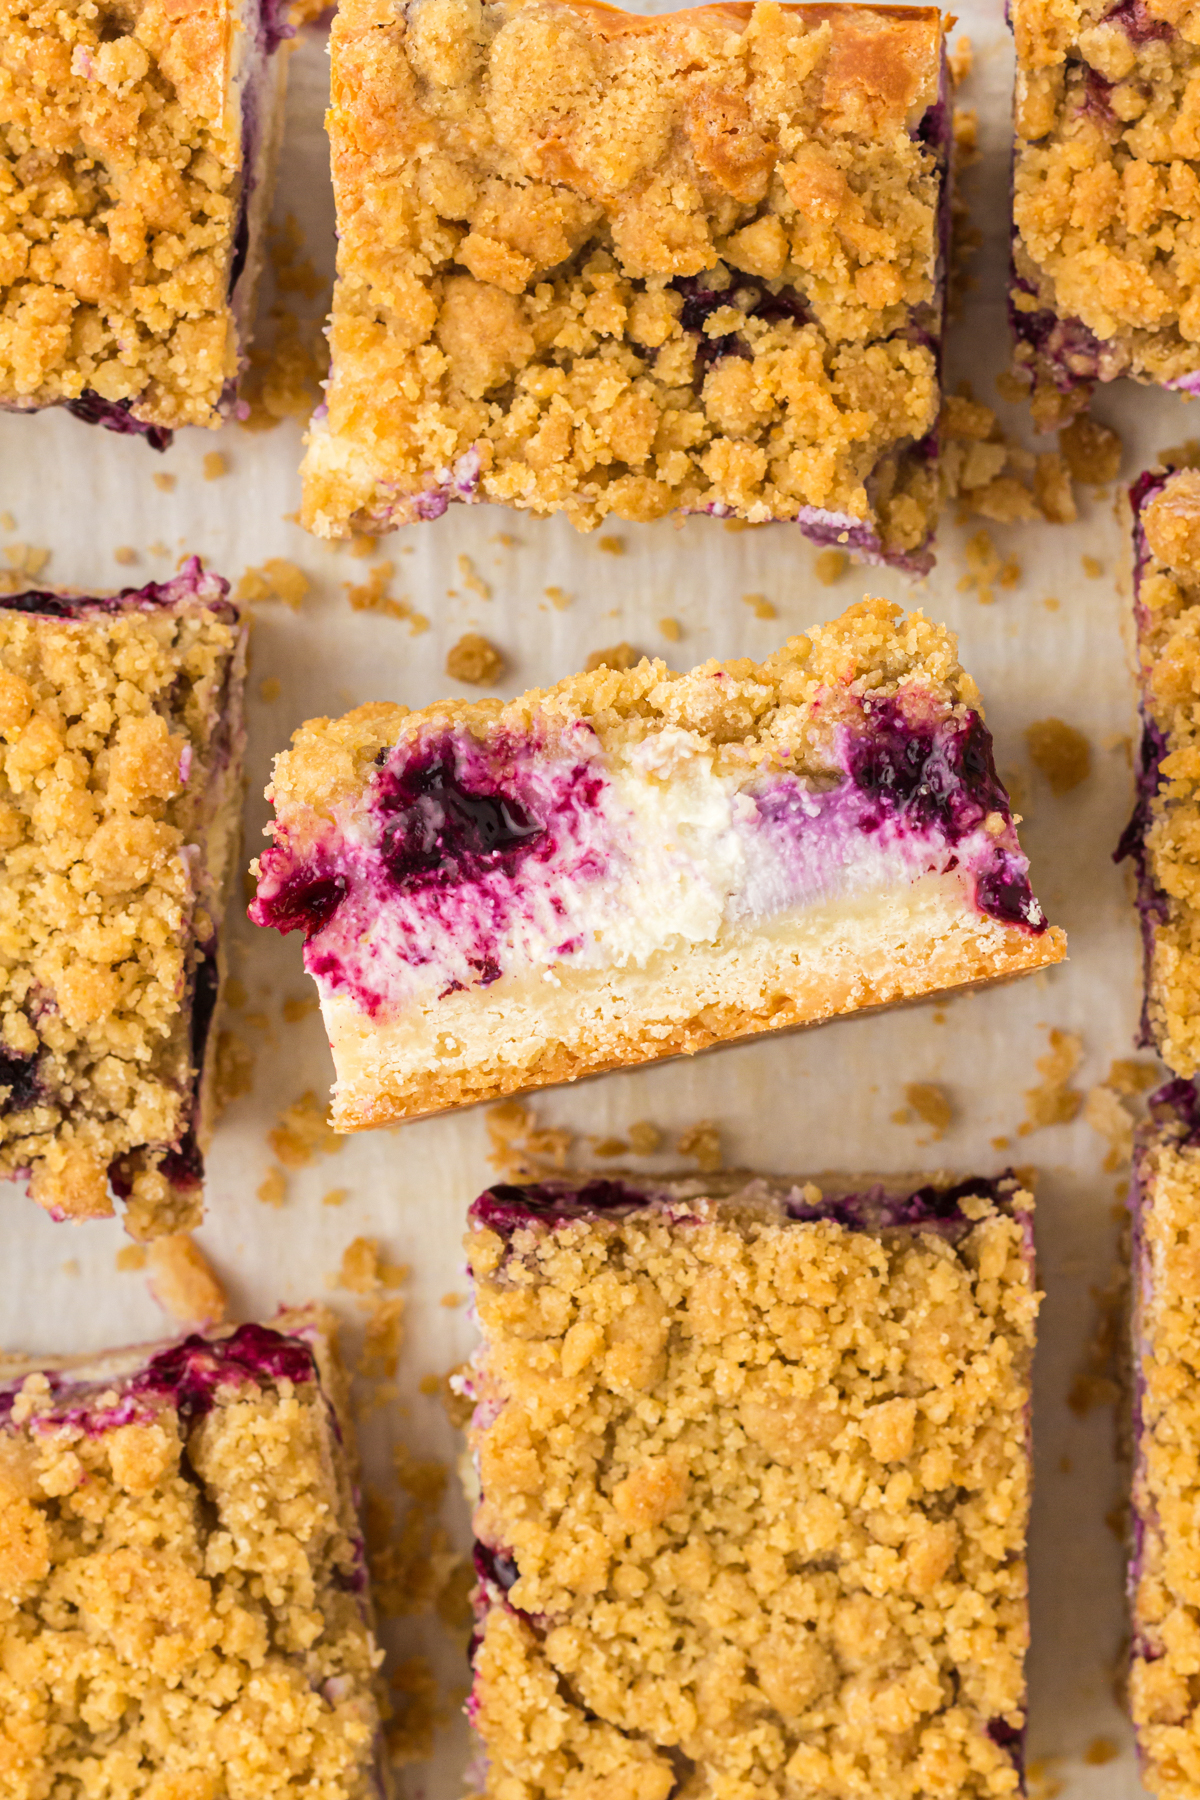 blueberry cheesecake bar flipped over